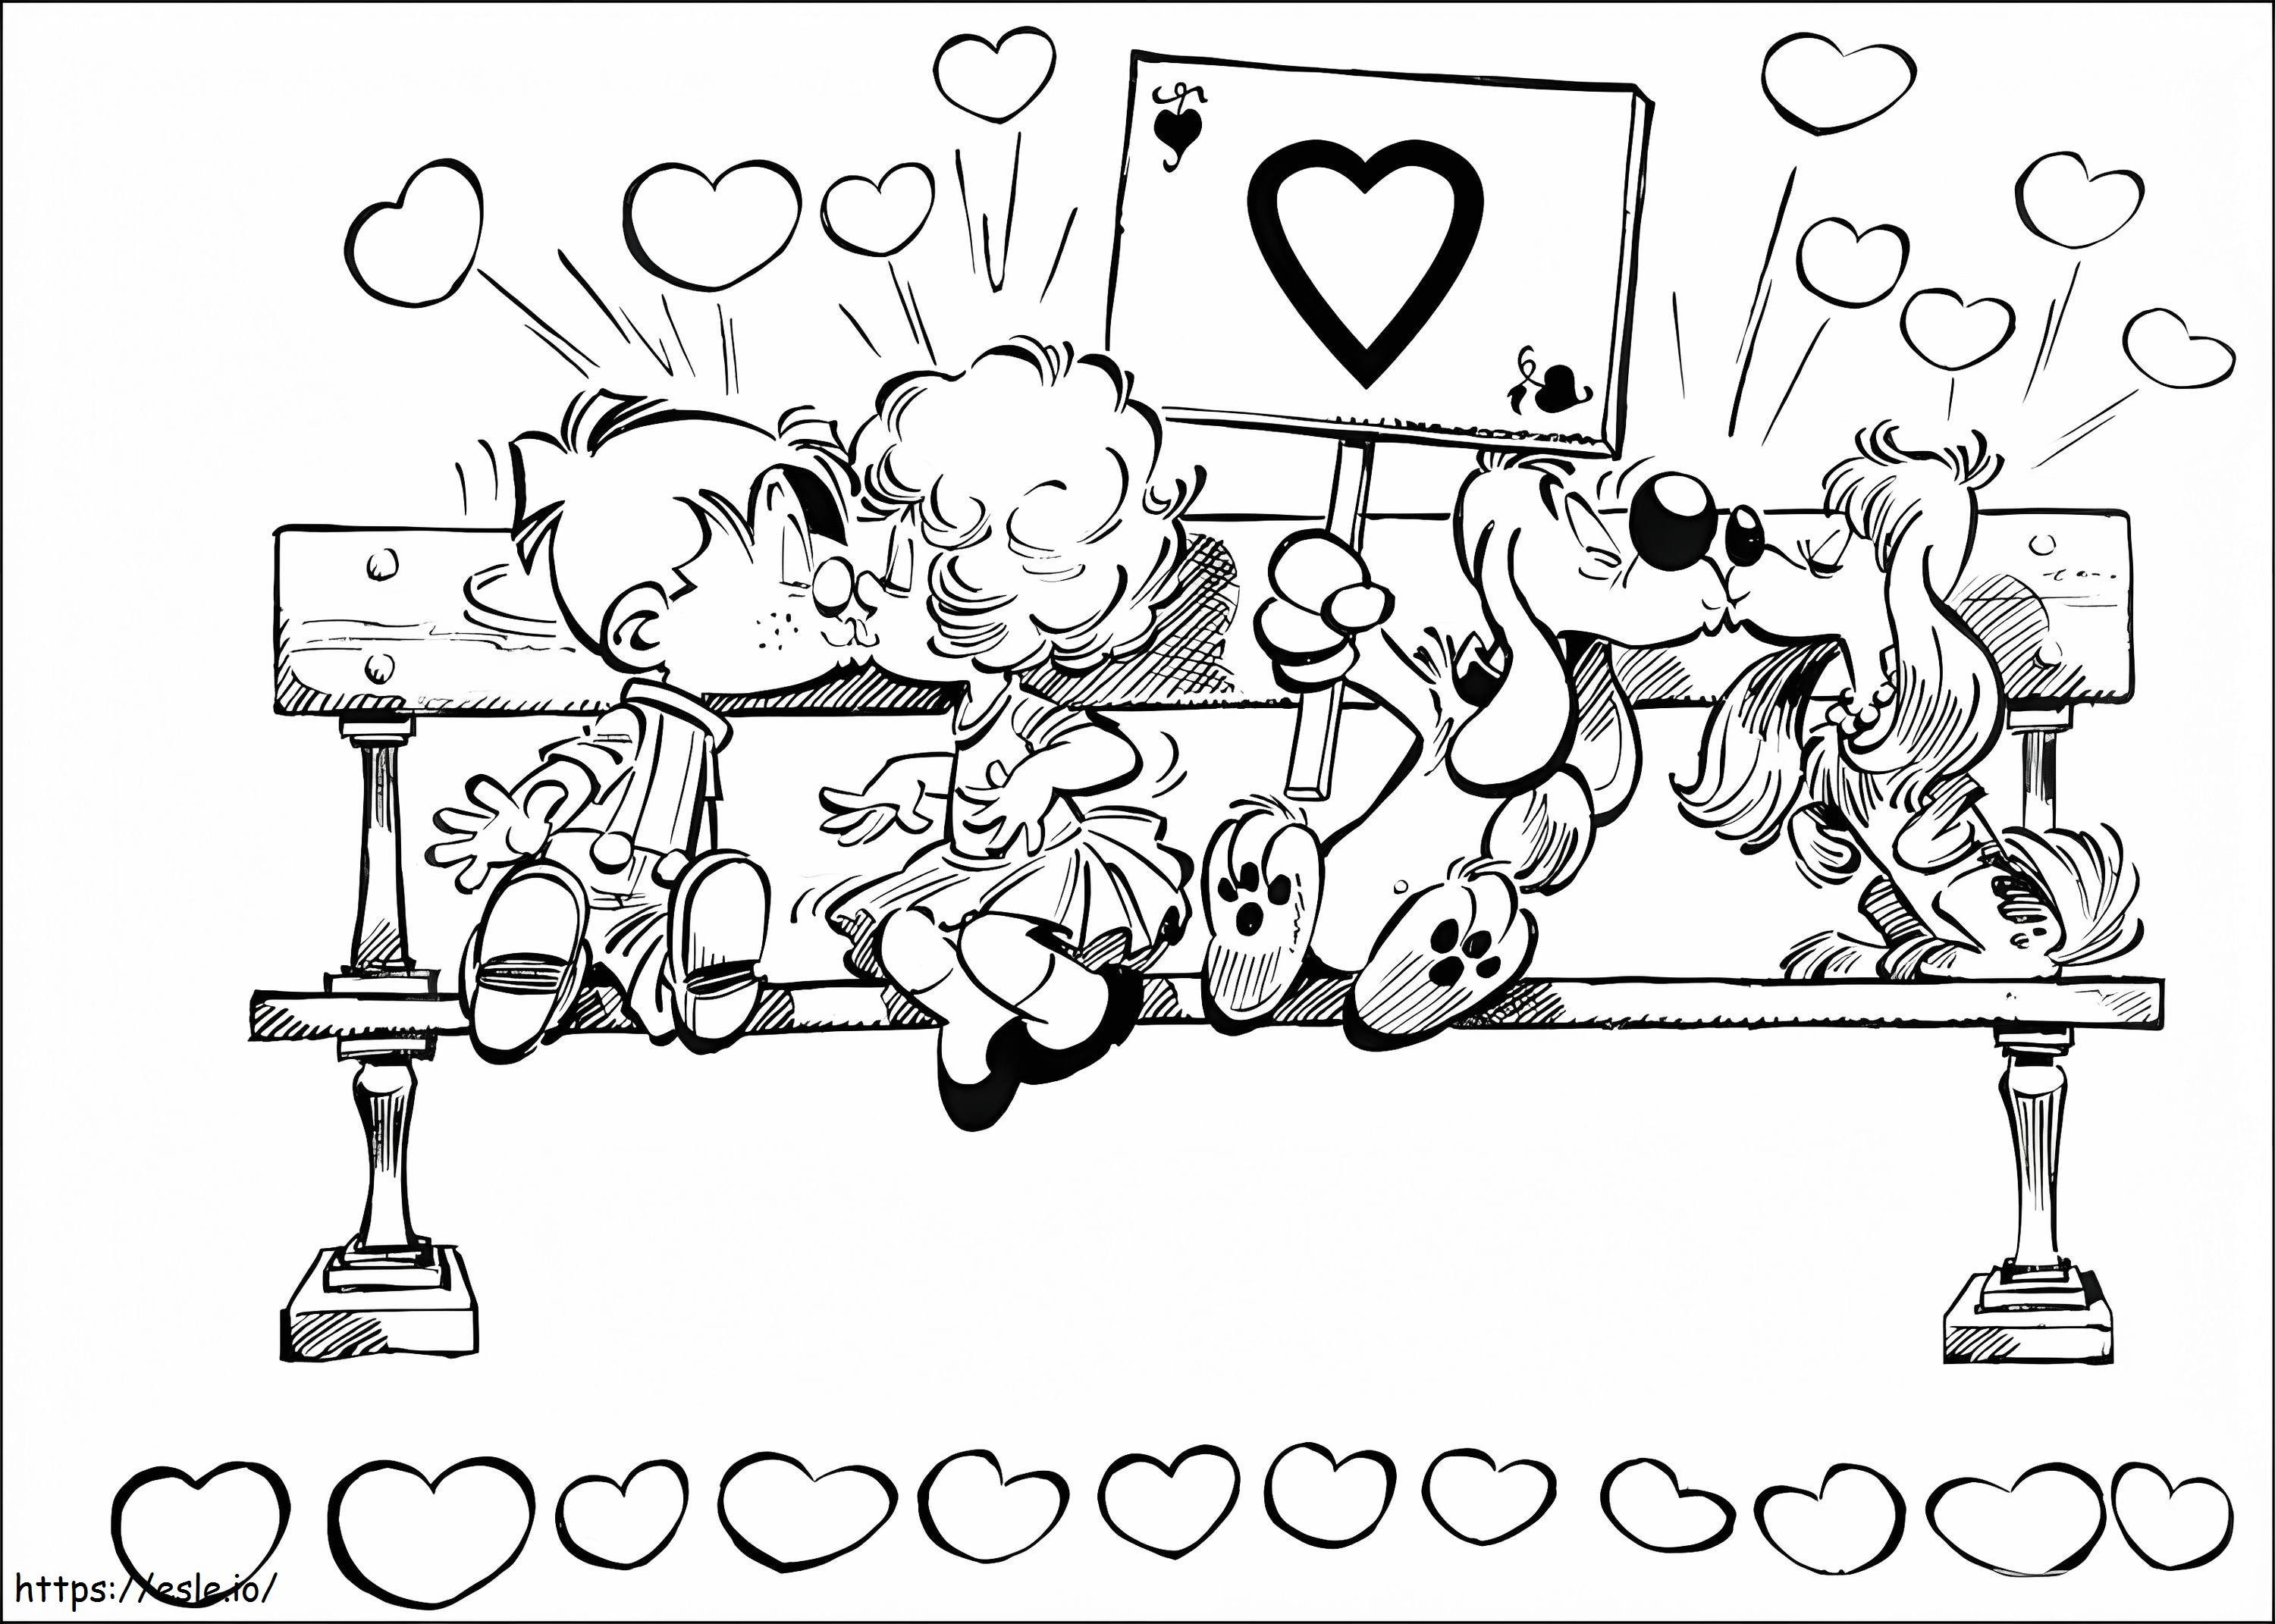 Billy And Buddy 10 coloring page